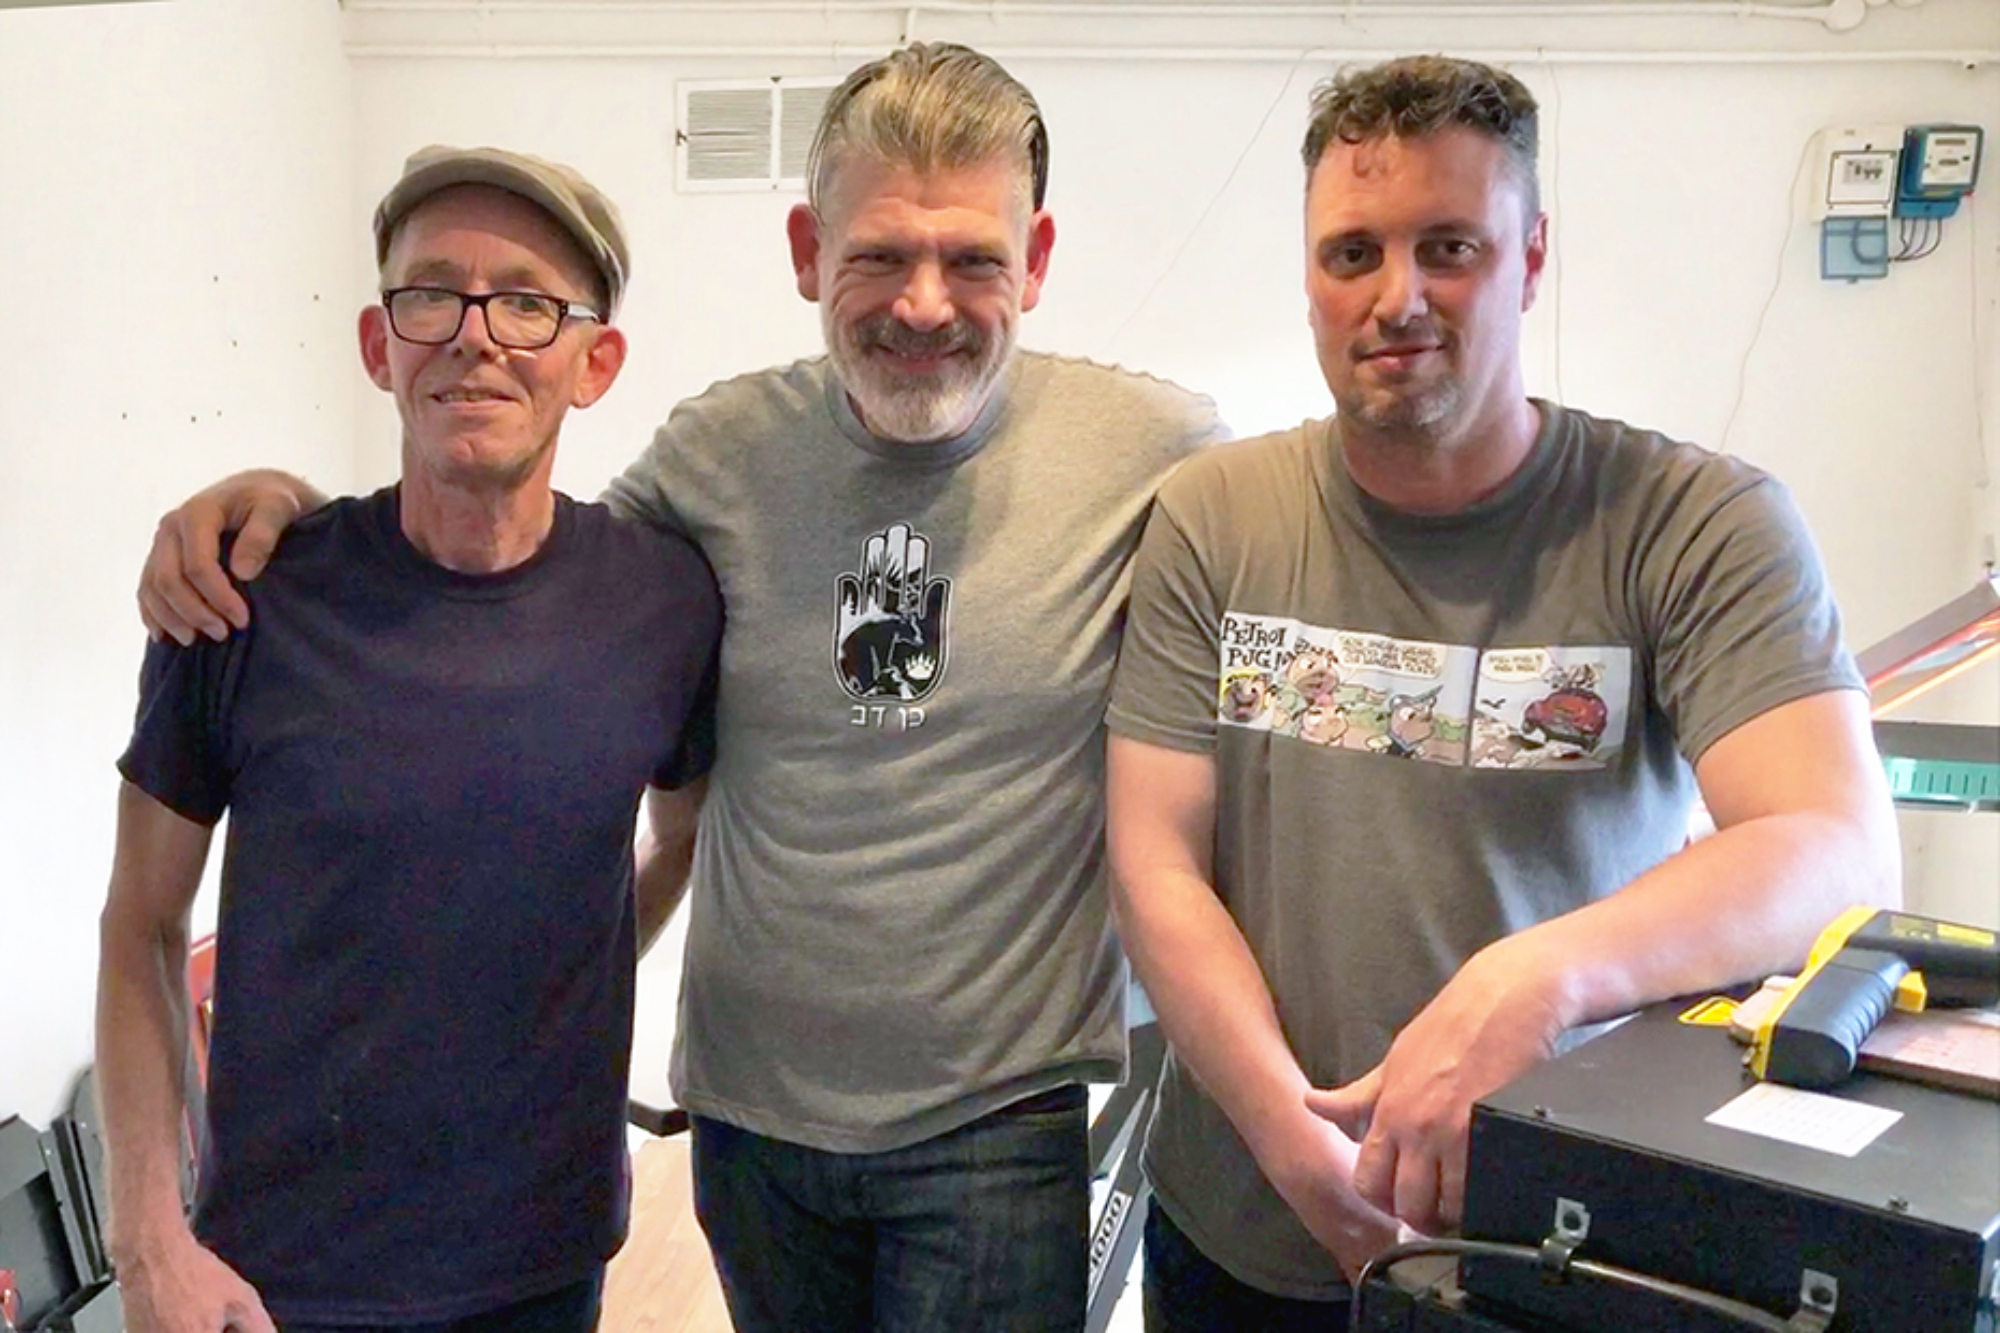 Zenessex Studio refined its techniques with training by Douglas Grigar (center), master screen printer. He is flanked by owners Richard Sharpe (left) and Kevin Burtt (right).